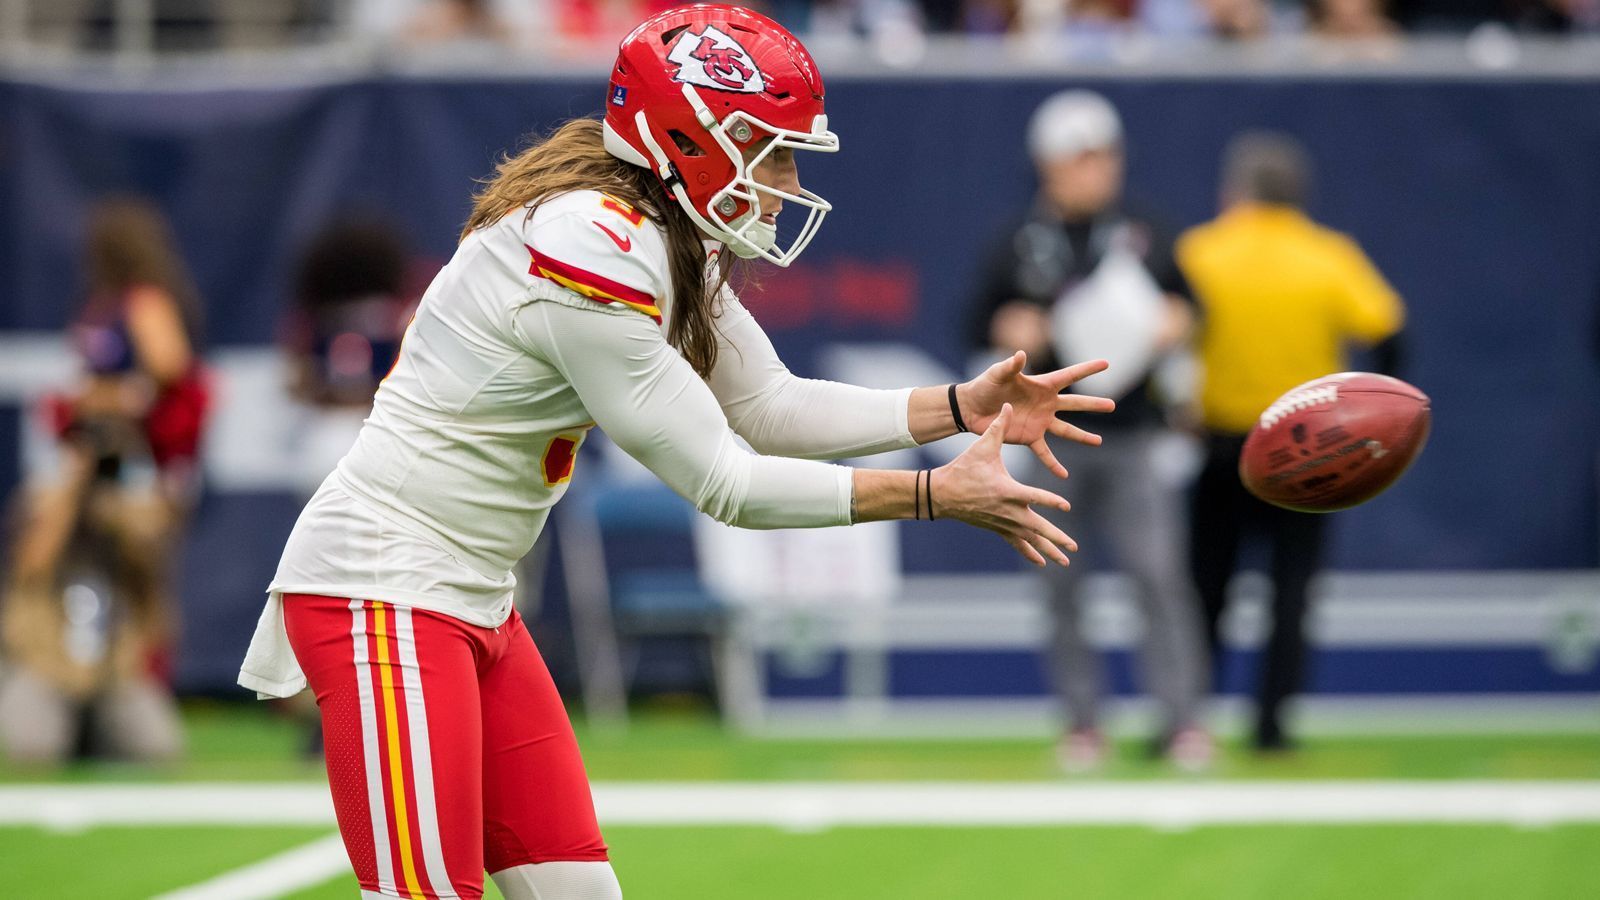 
                <strong>Tommy Townsend</strong><br>
                Position: Punter Team: Kansas City Chiefs
              